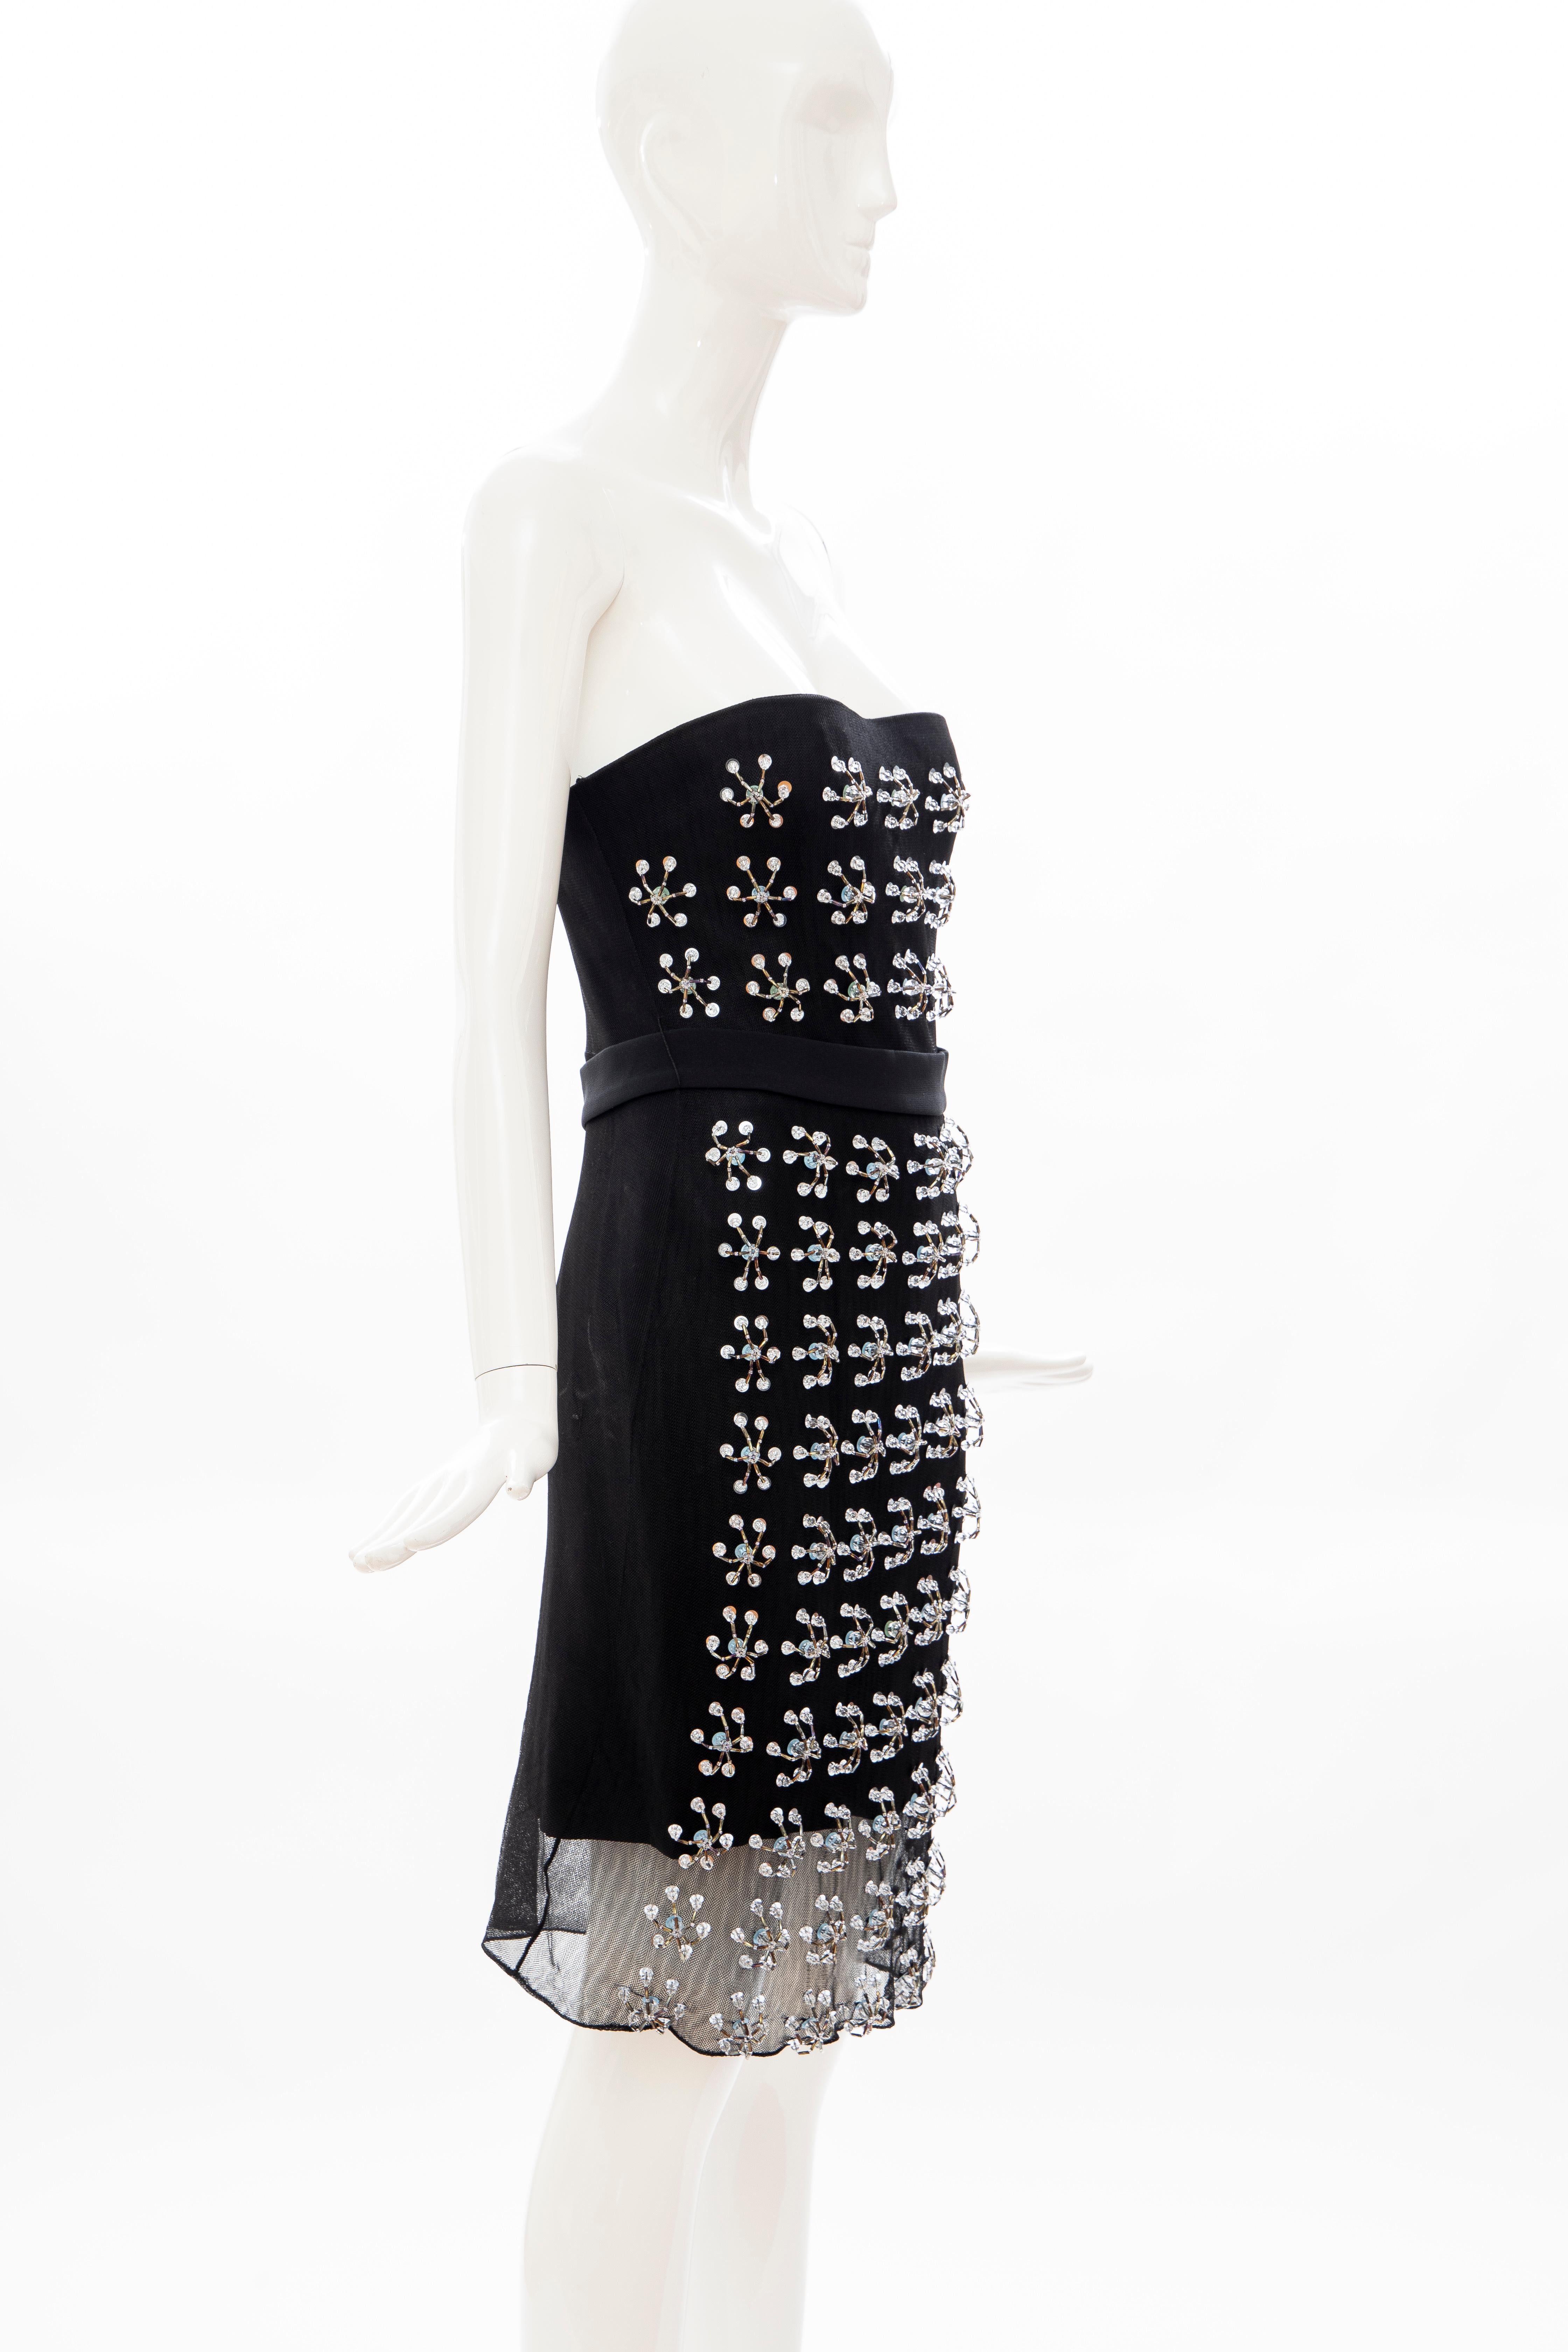 Black Raf Simons for Christian Dior Runway Strapless Embroidered Dress, Spring 2013 For Sale